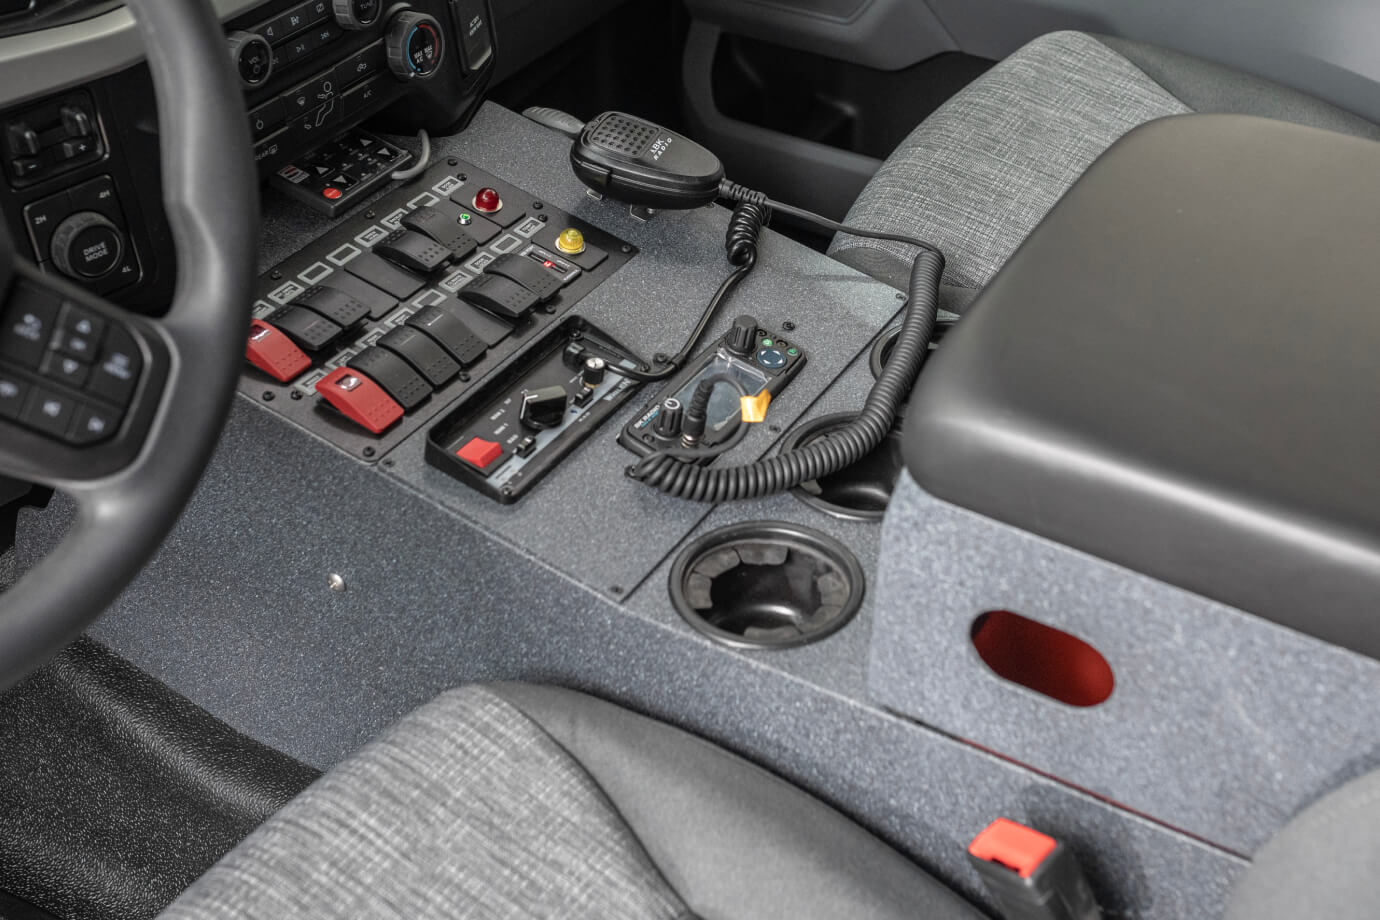 Command Center with Rocker Switches